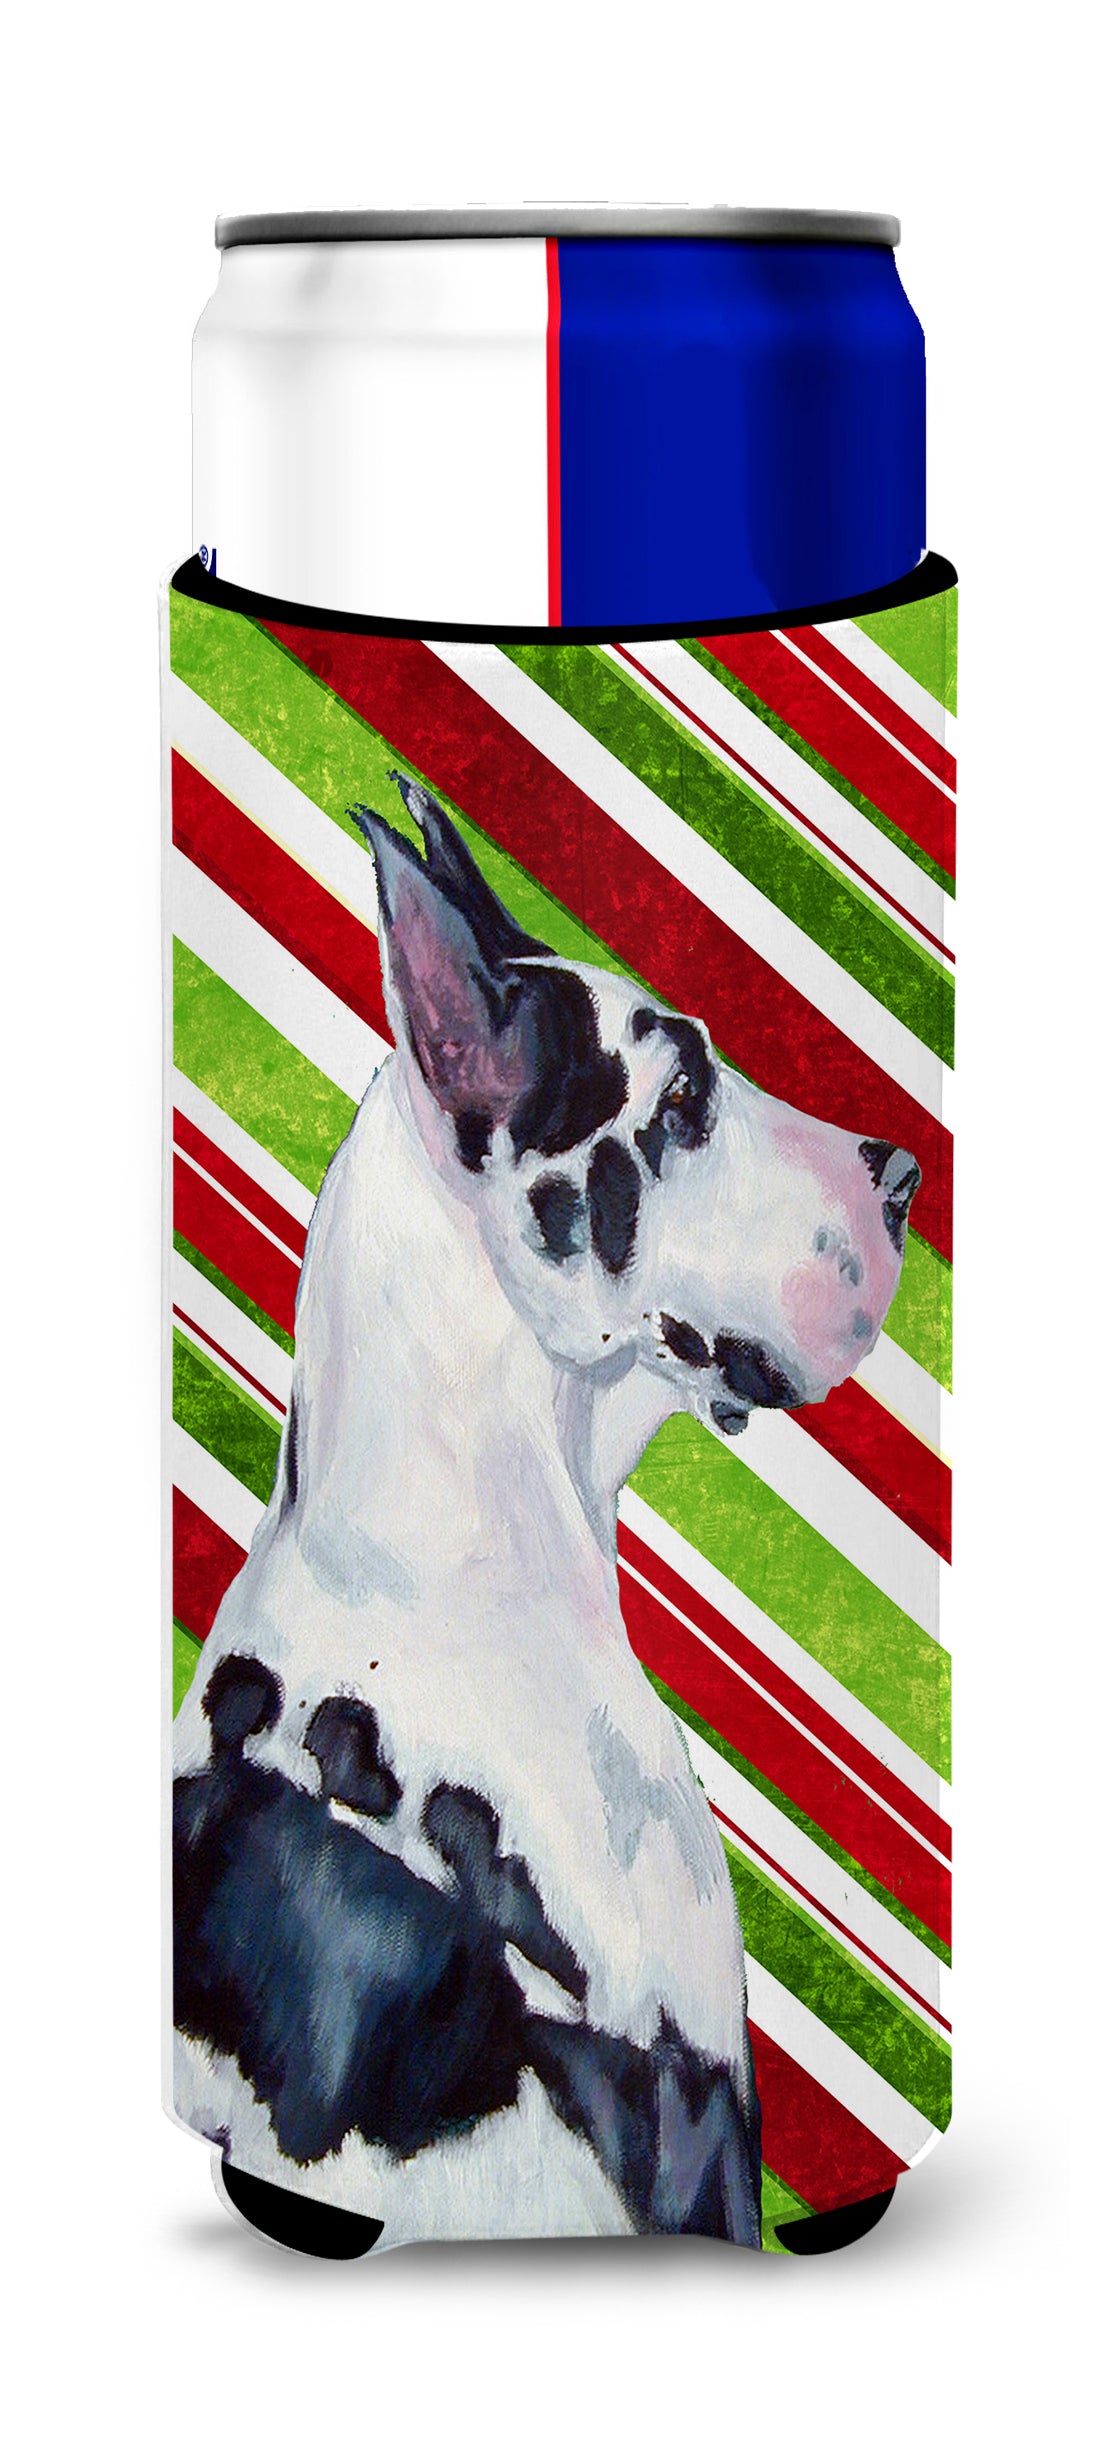 Great Dane Candy Cane Holiday Christmas Ultra Beverage Insulators for slim cans LH9236MUK.